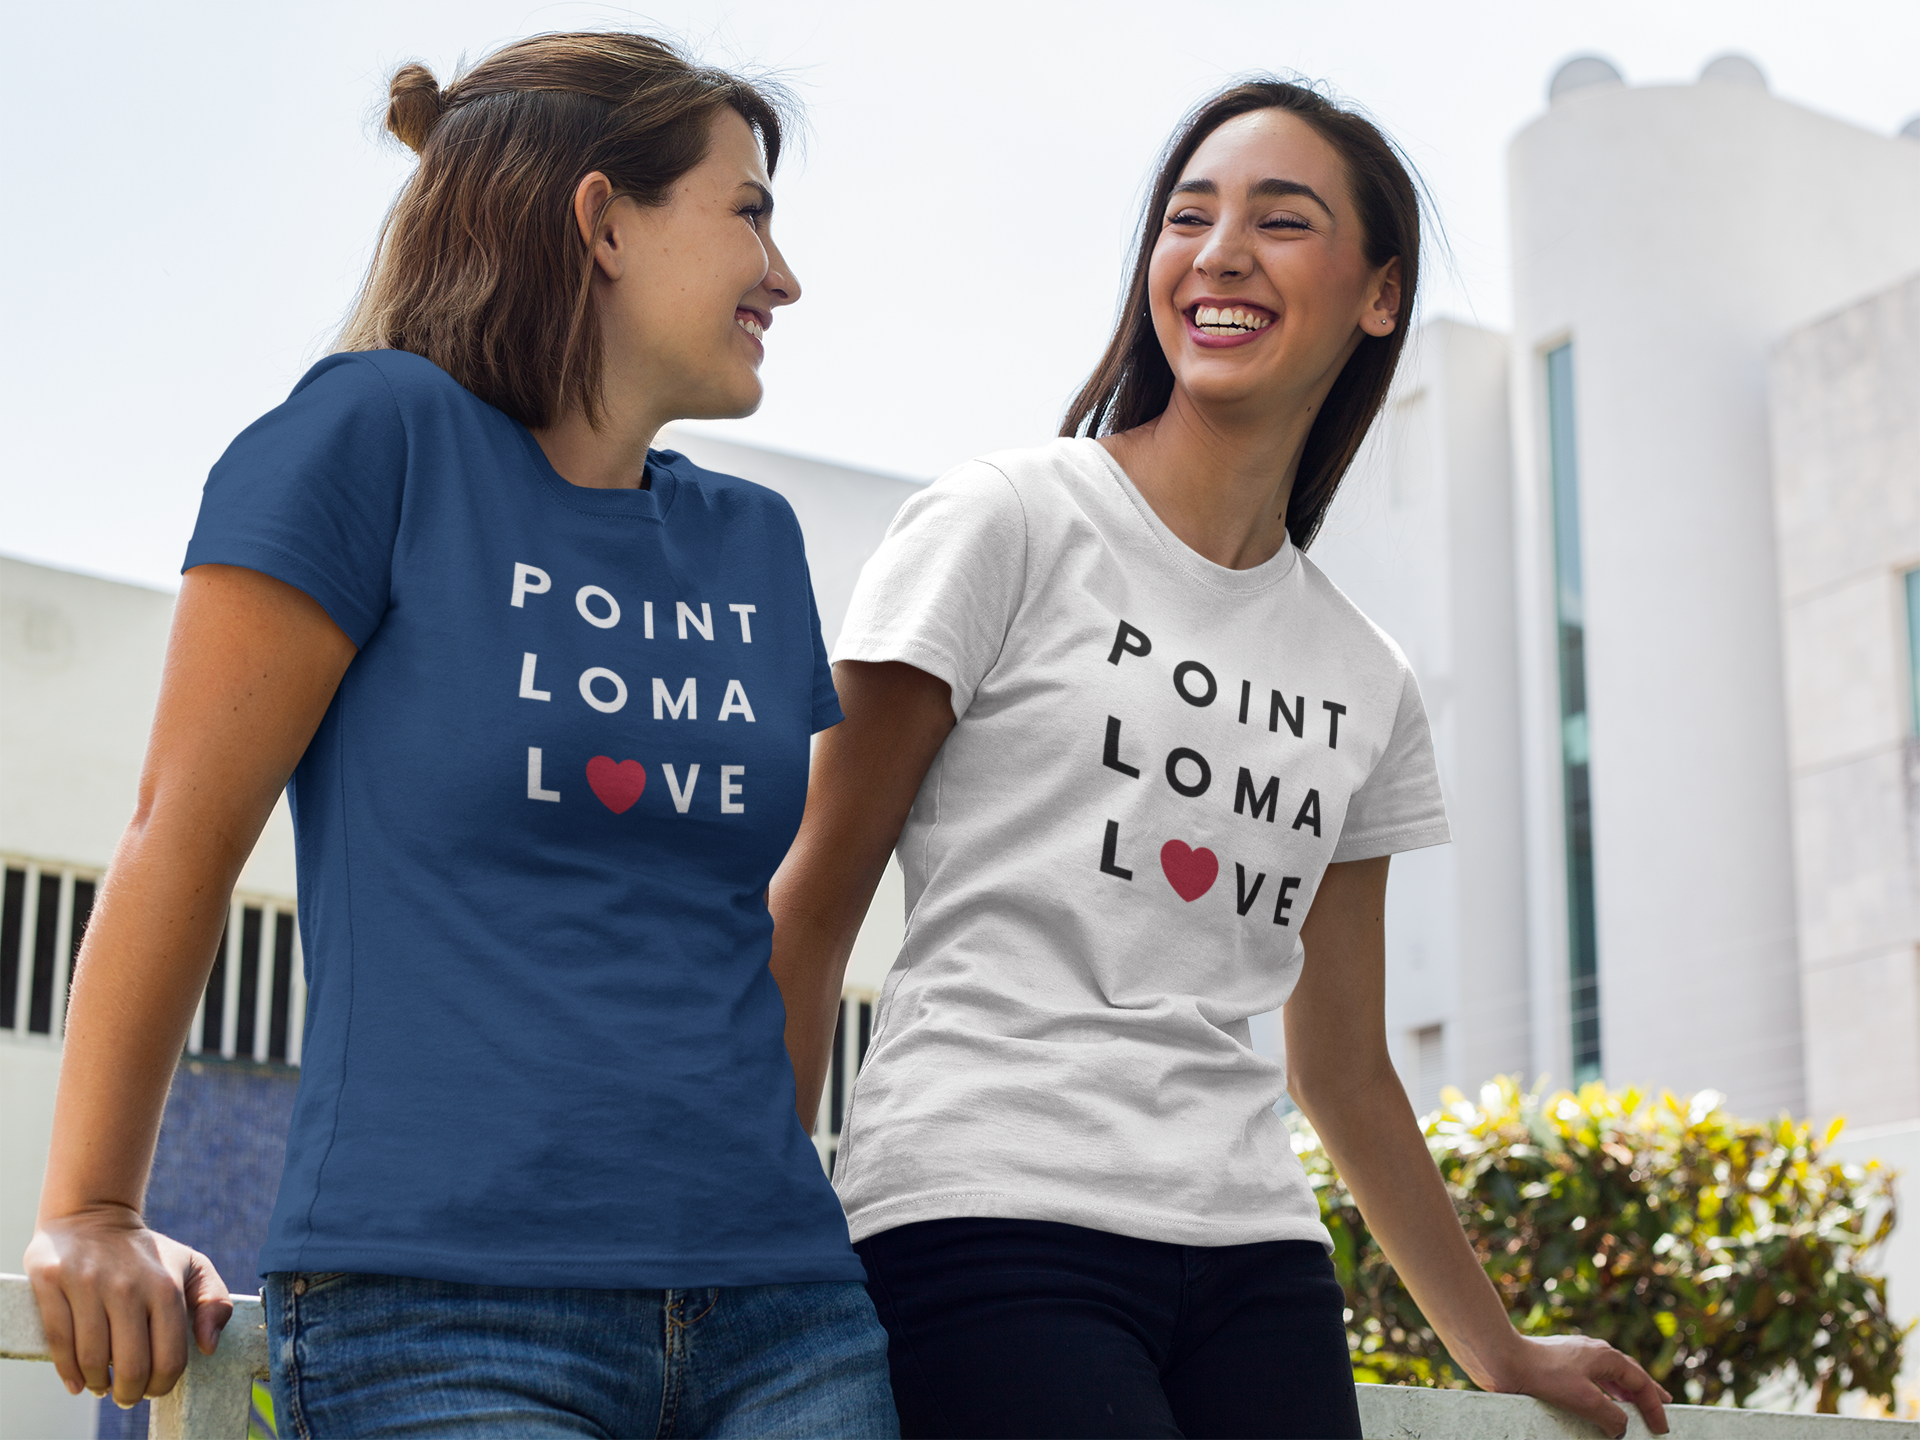 Two smiling women gazing at each other in a garden wearing Point Loma love tees.